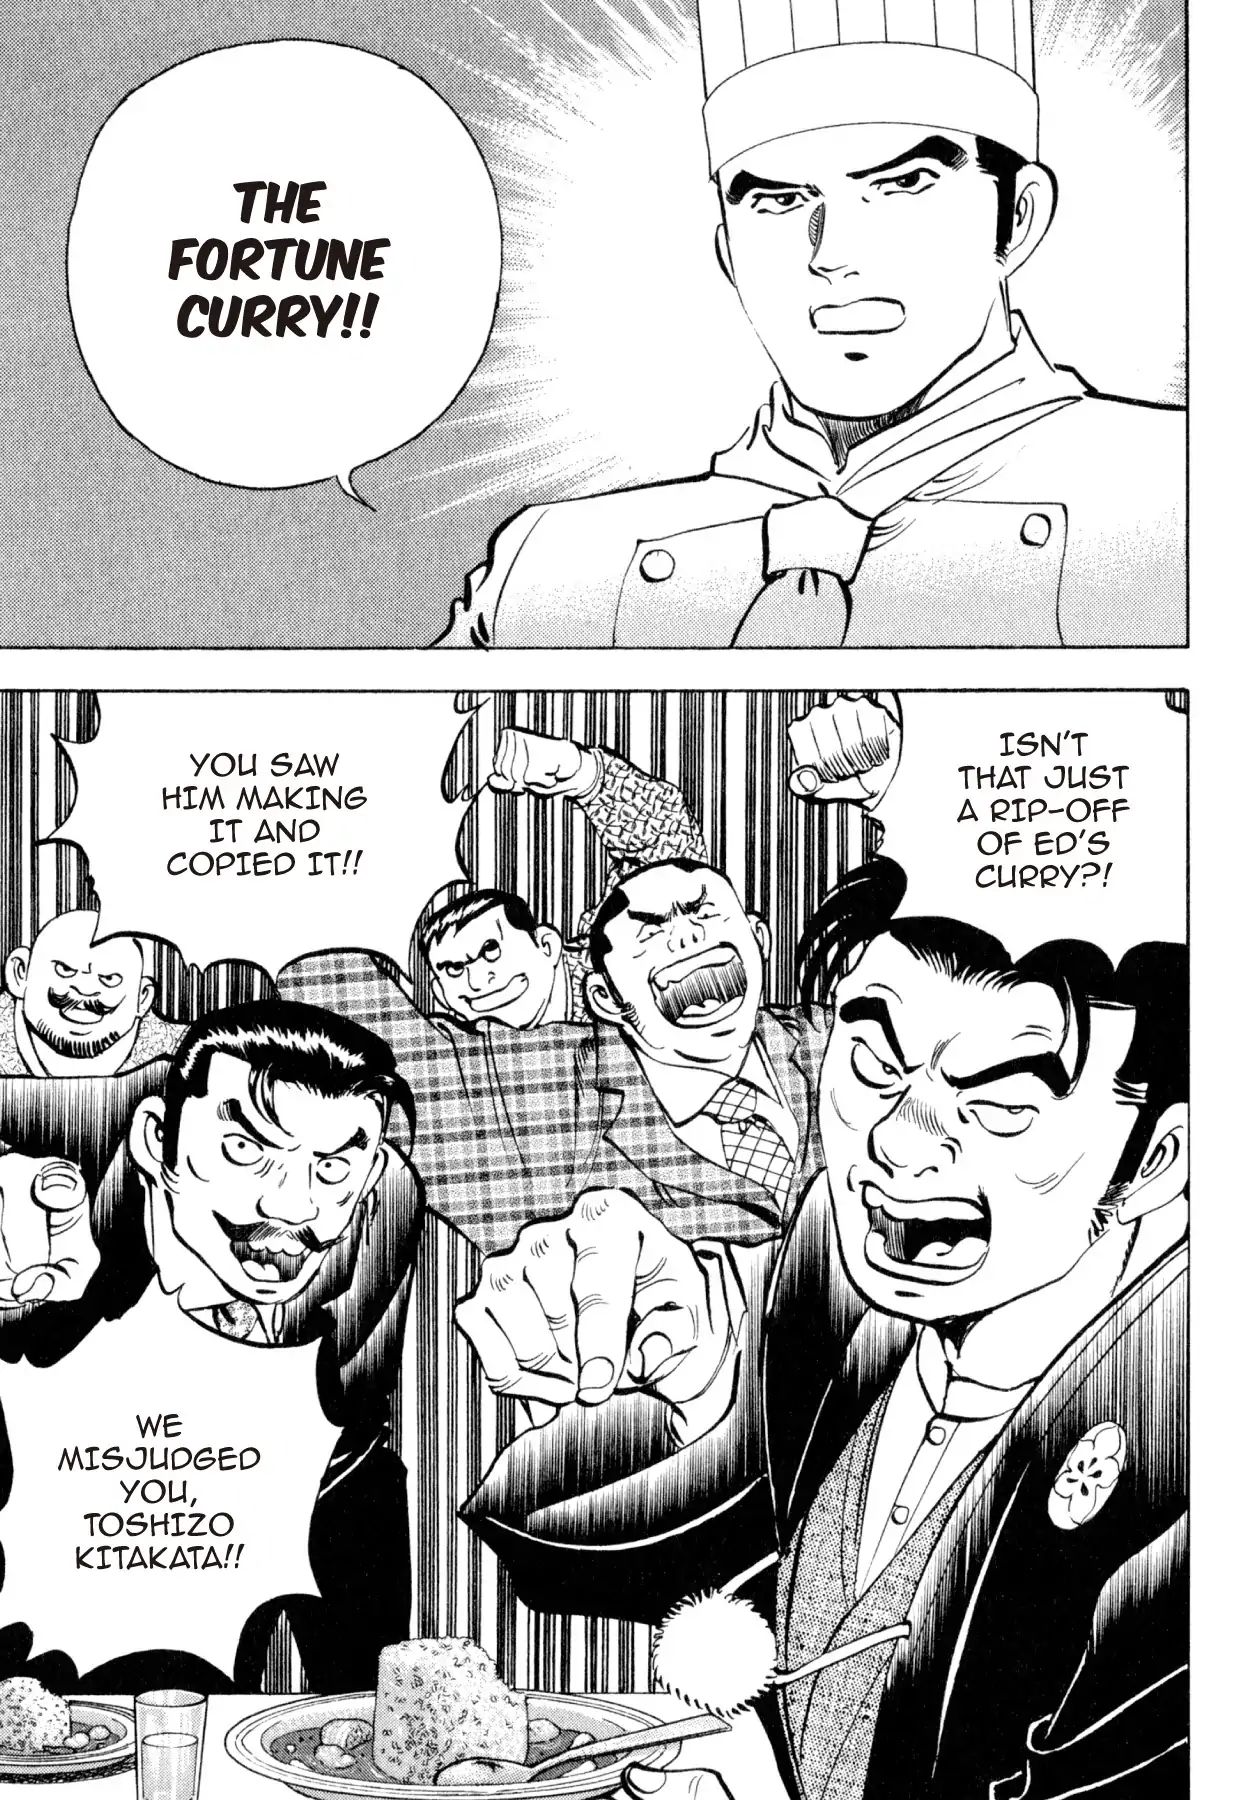 Shoku King VOL.25 CHAPTER 231: THE KIND OF CURRY